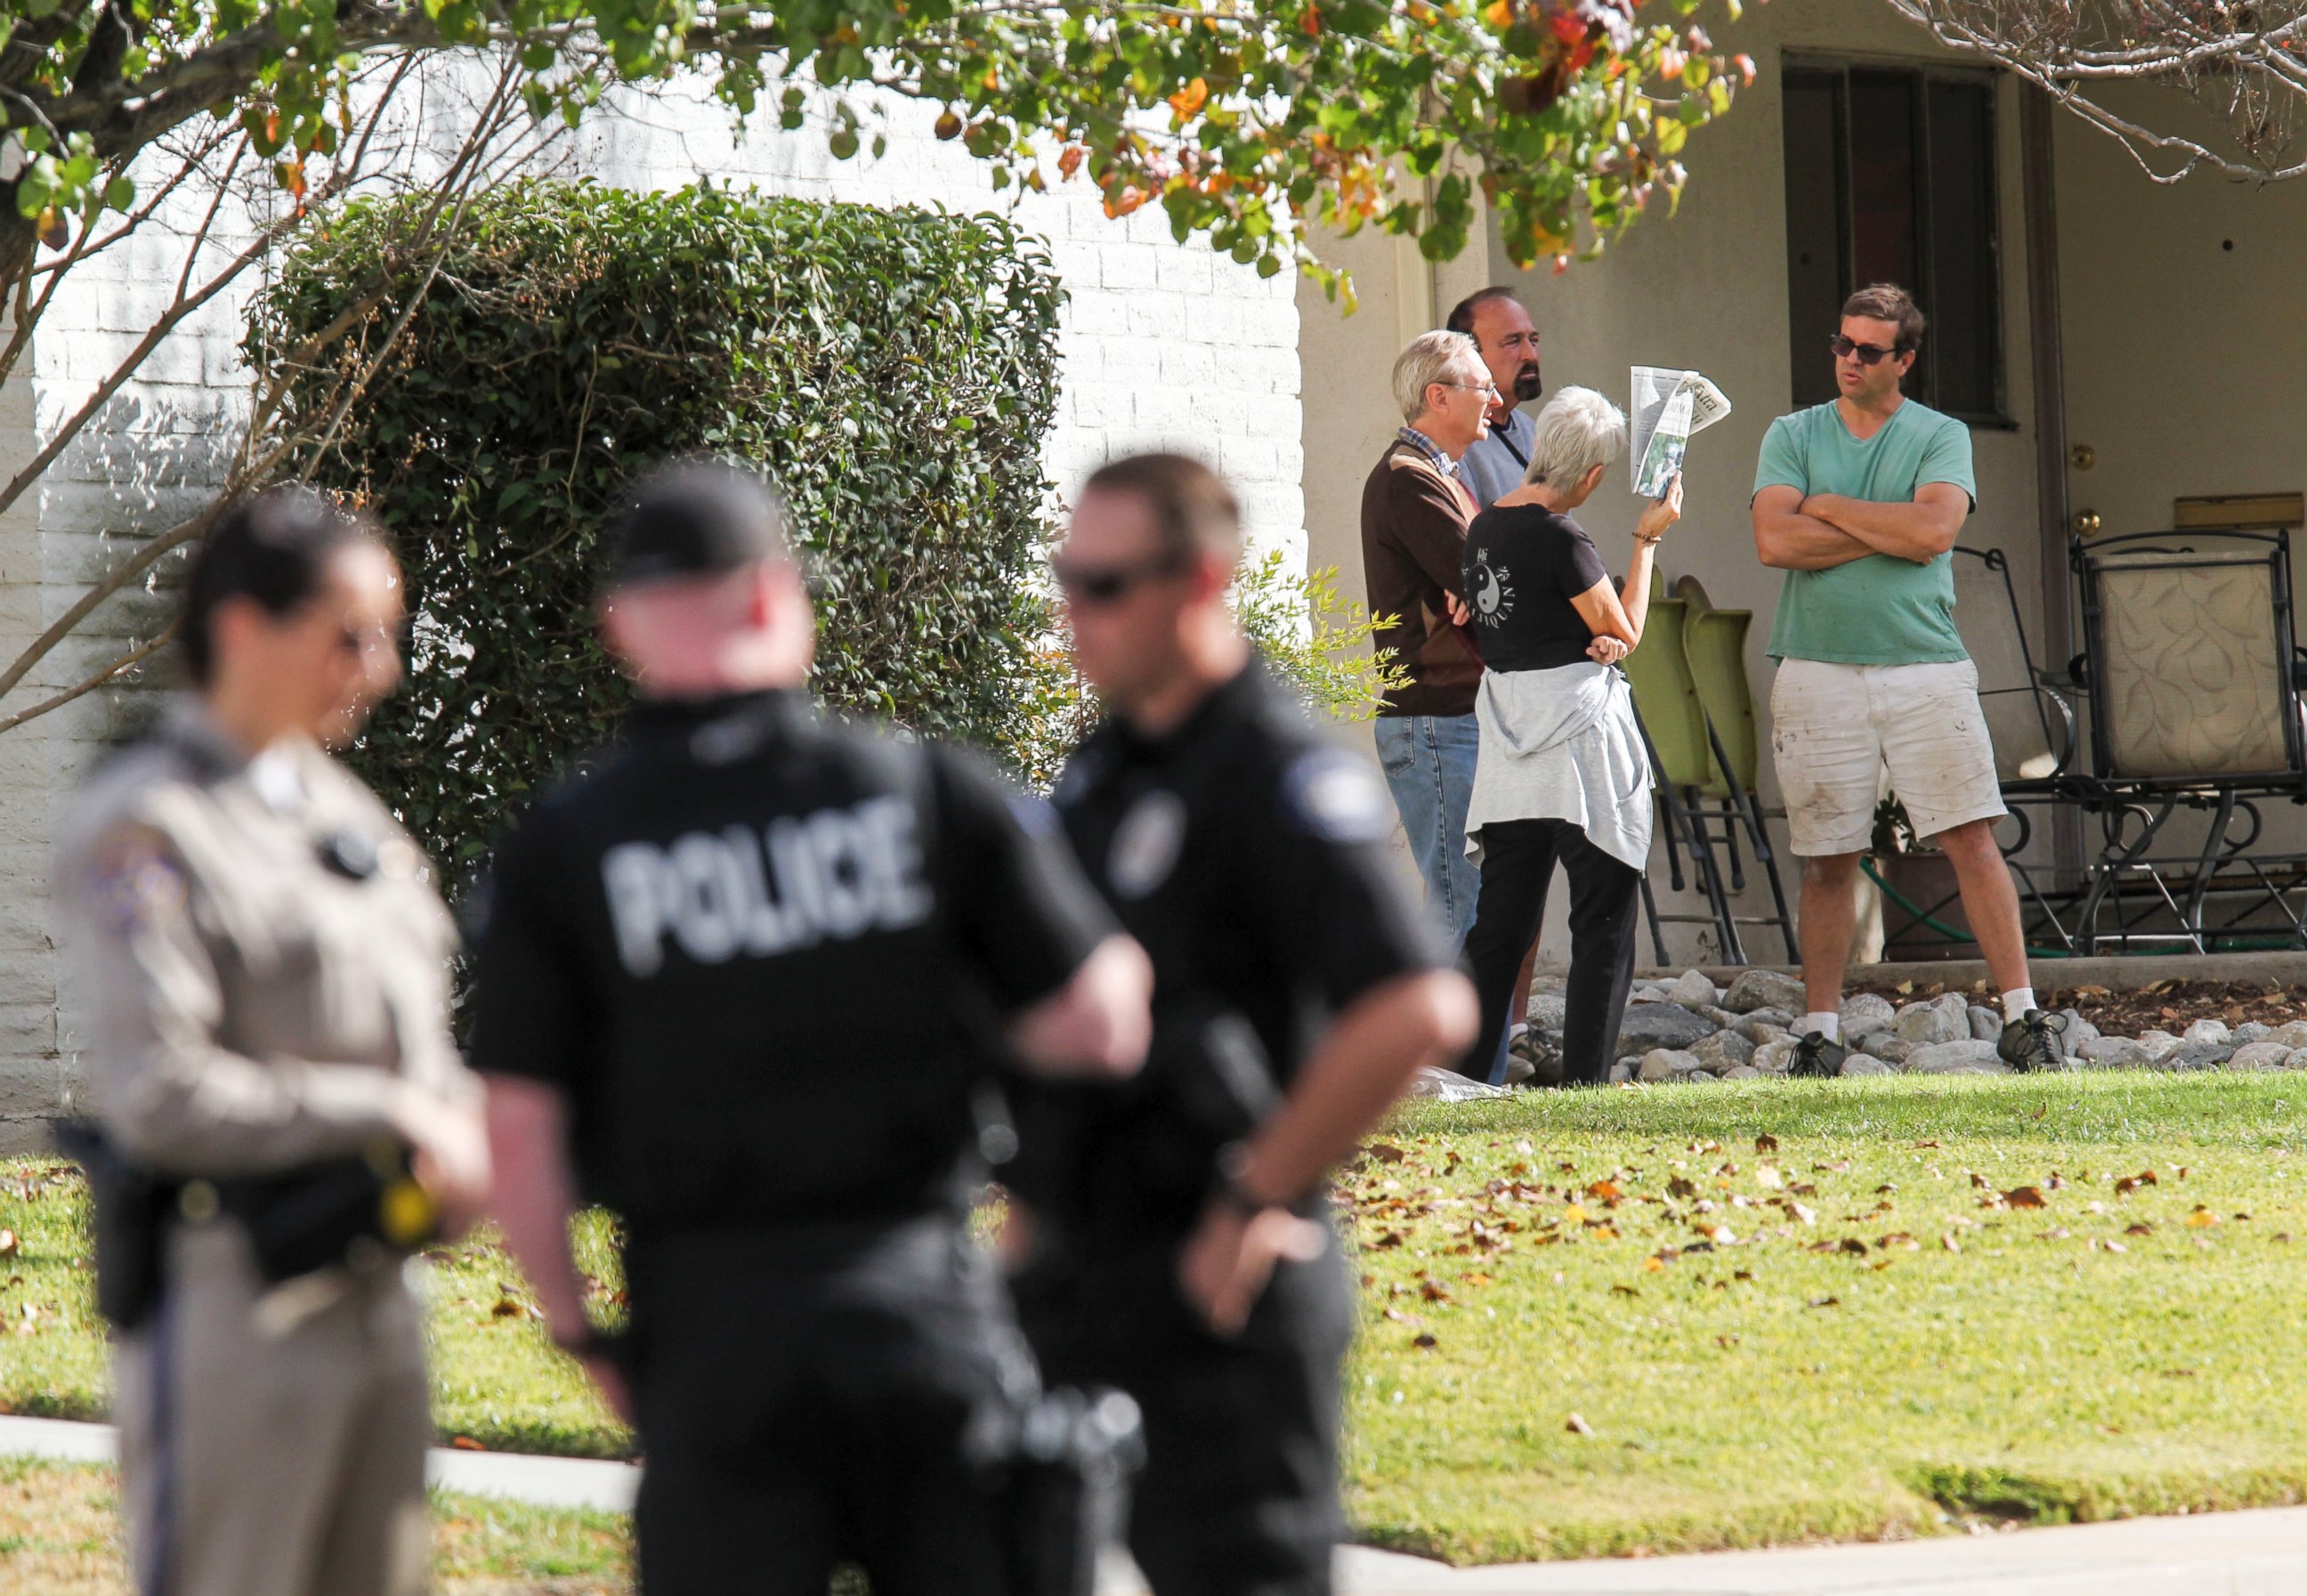 PHOTO: People gather in the neighborhood near the home in connection to the shootings in San Bernardino, Dec. 3, 2015, in Redlands, Calif.